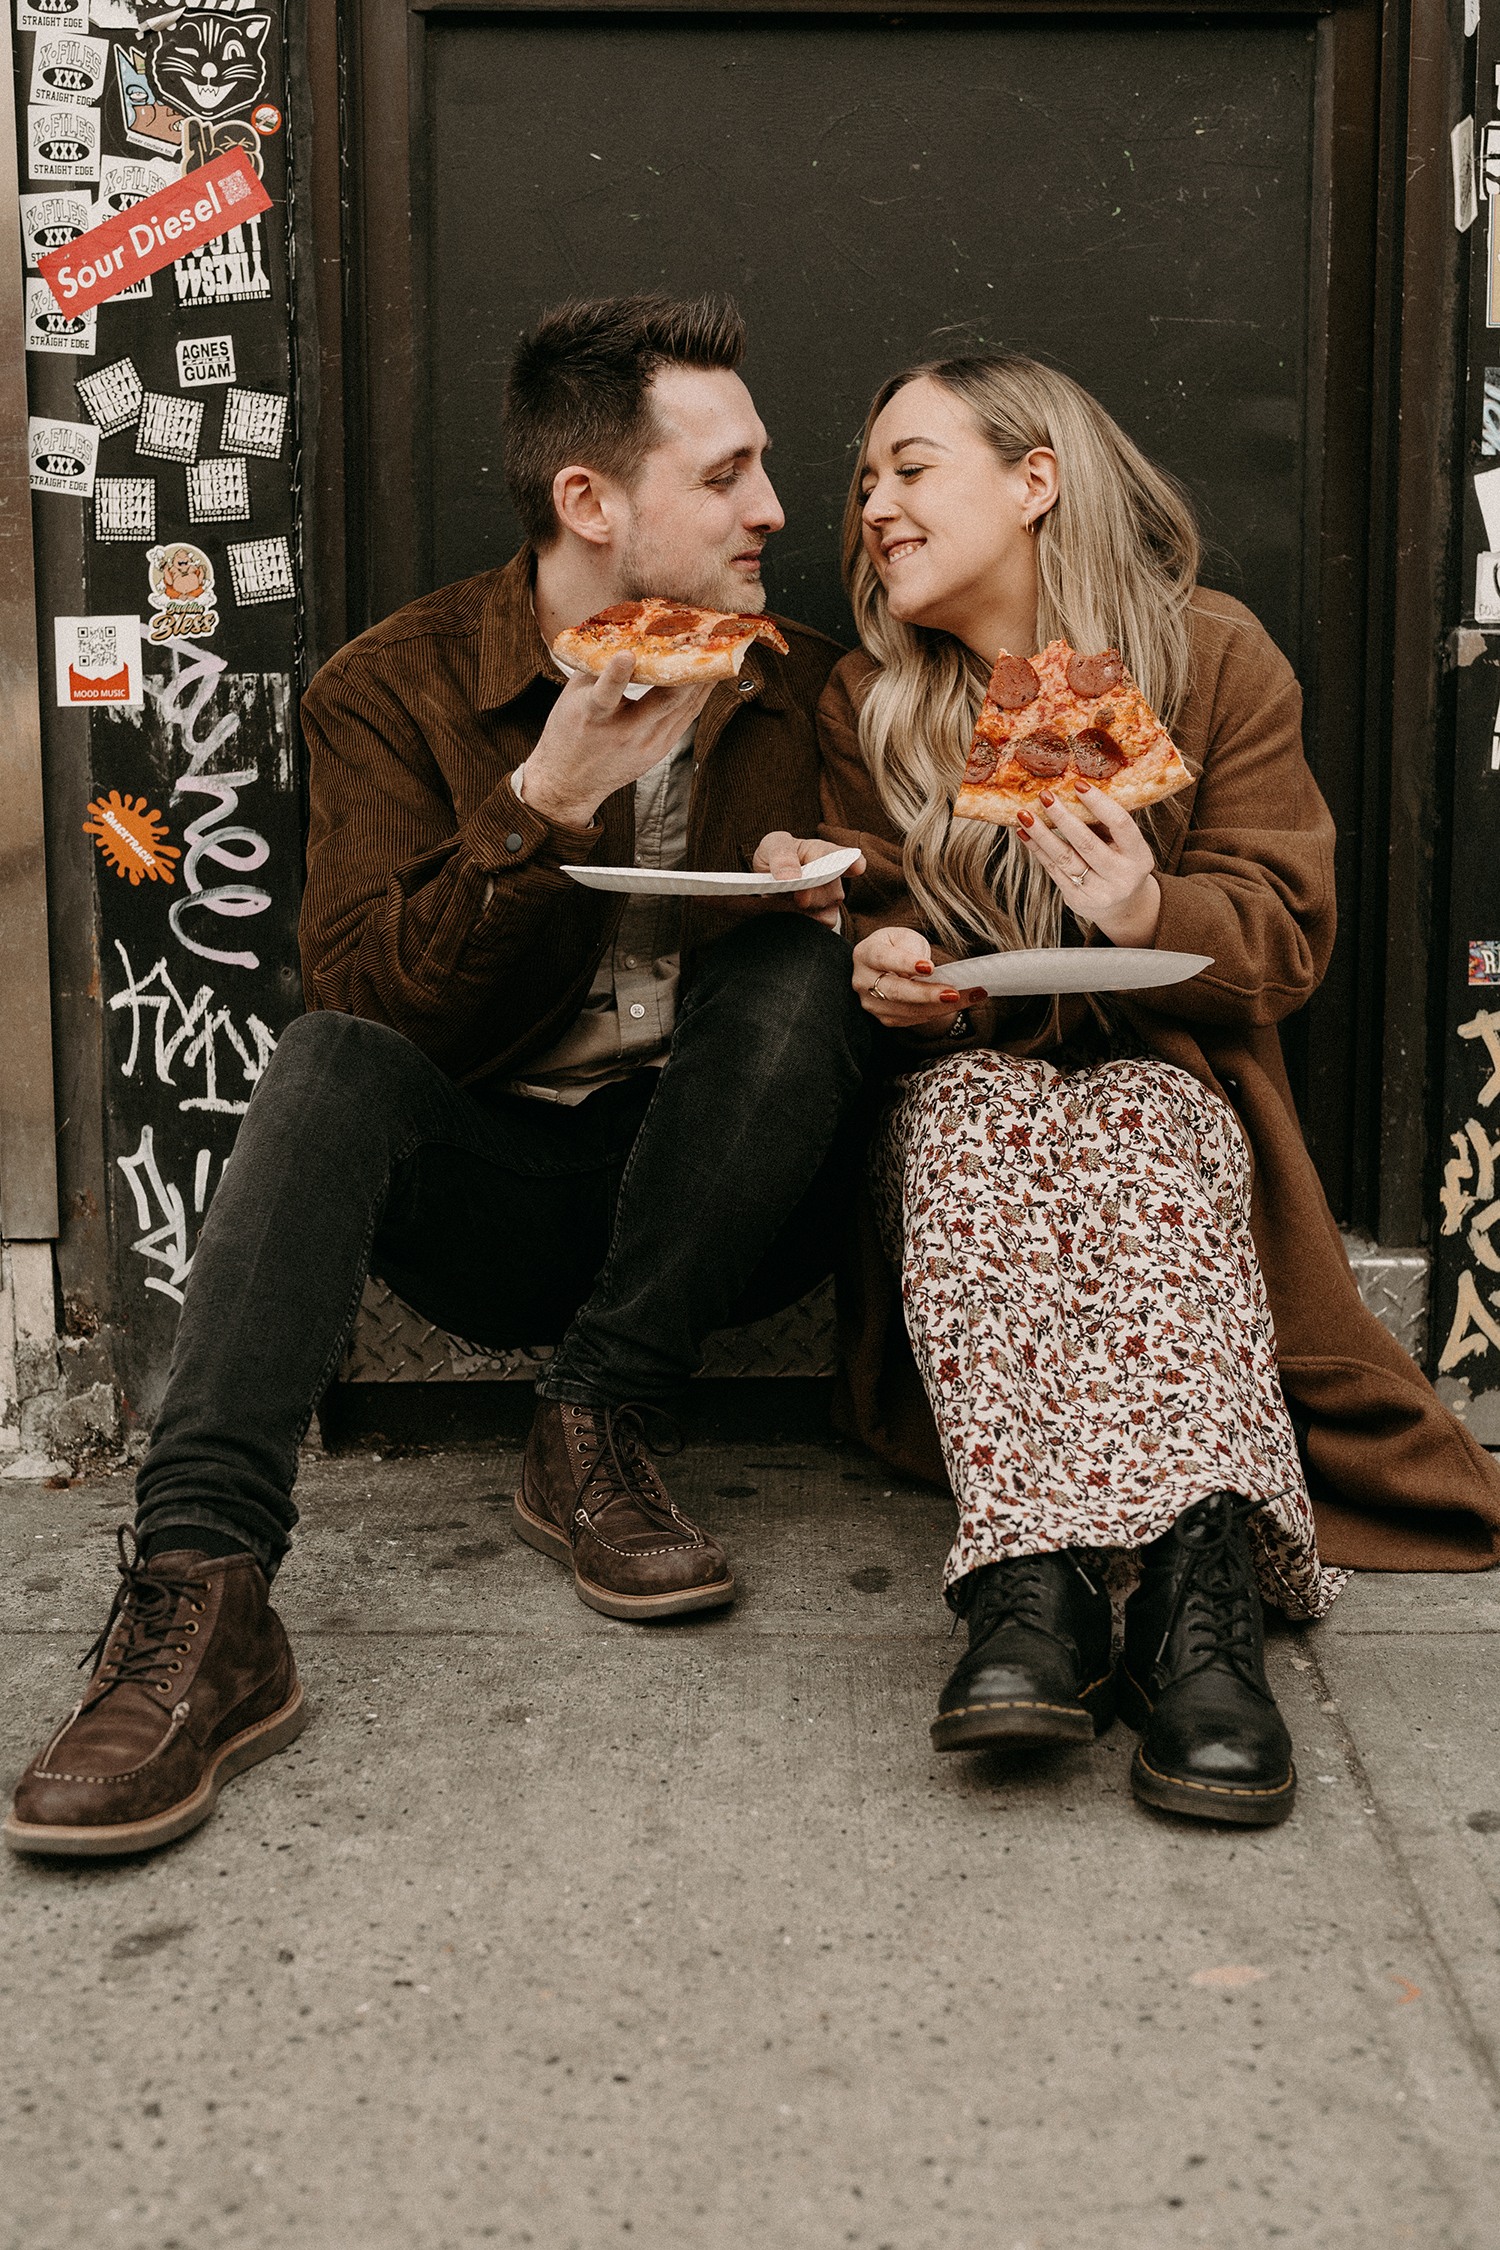 Cozy cuddles on a NYC stoop while eating pizza during engagement photos in Williamsburg.